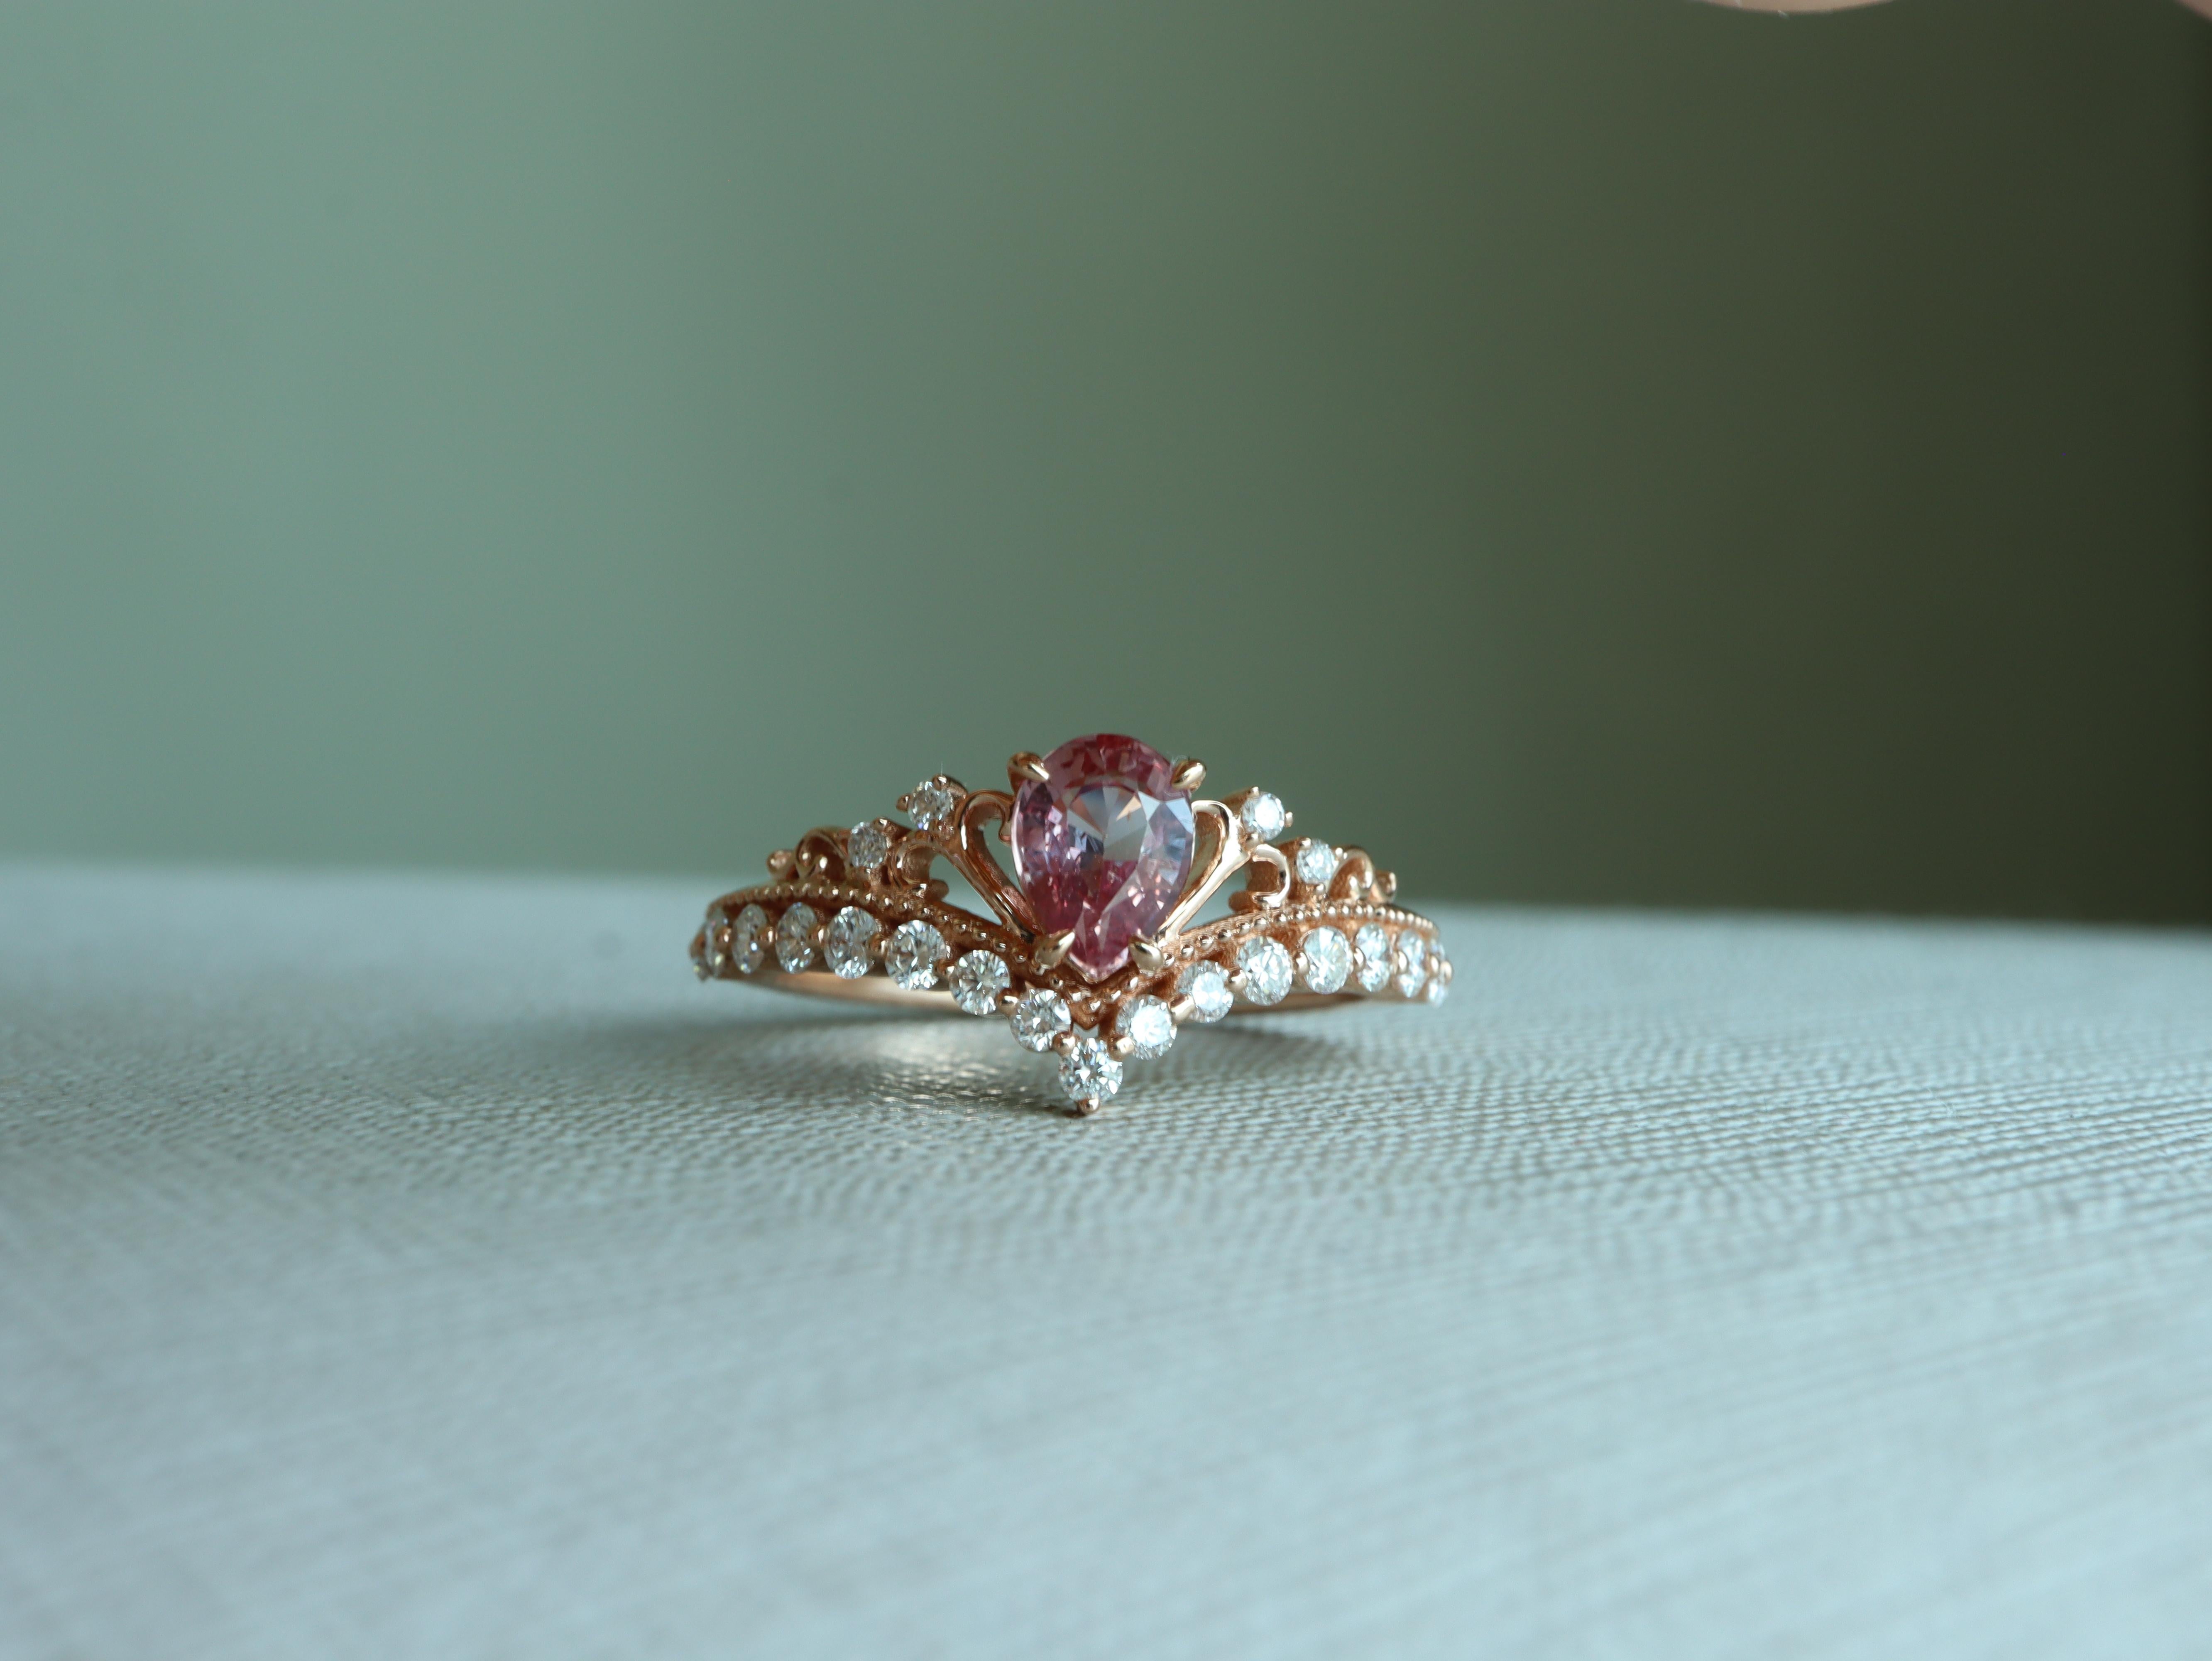 Padparadscha sapphire is known as one of the rarest gemstones globally. This tiara crown ring is meticulously crafted in 18k solid gold, featuring a central No Heat Padparadscha beautifully complemented with shimmering natural diamonds. The